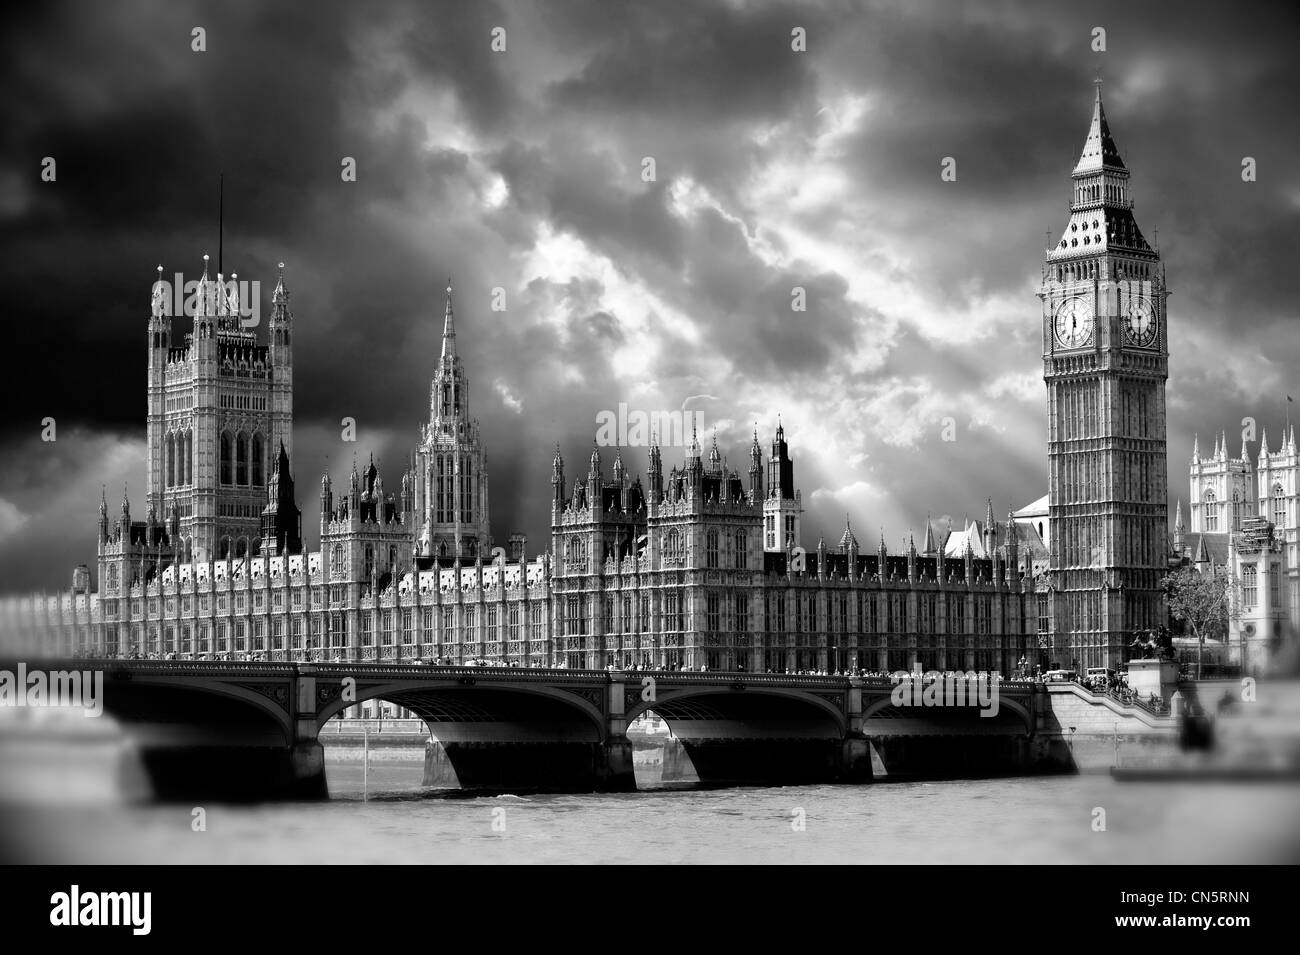 Big Ben and the Houses of Parliament, Westminster, London. Black & white dramatic picture Stock Photo